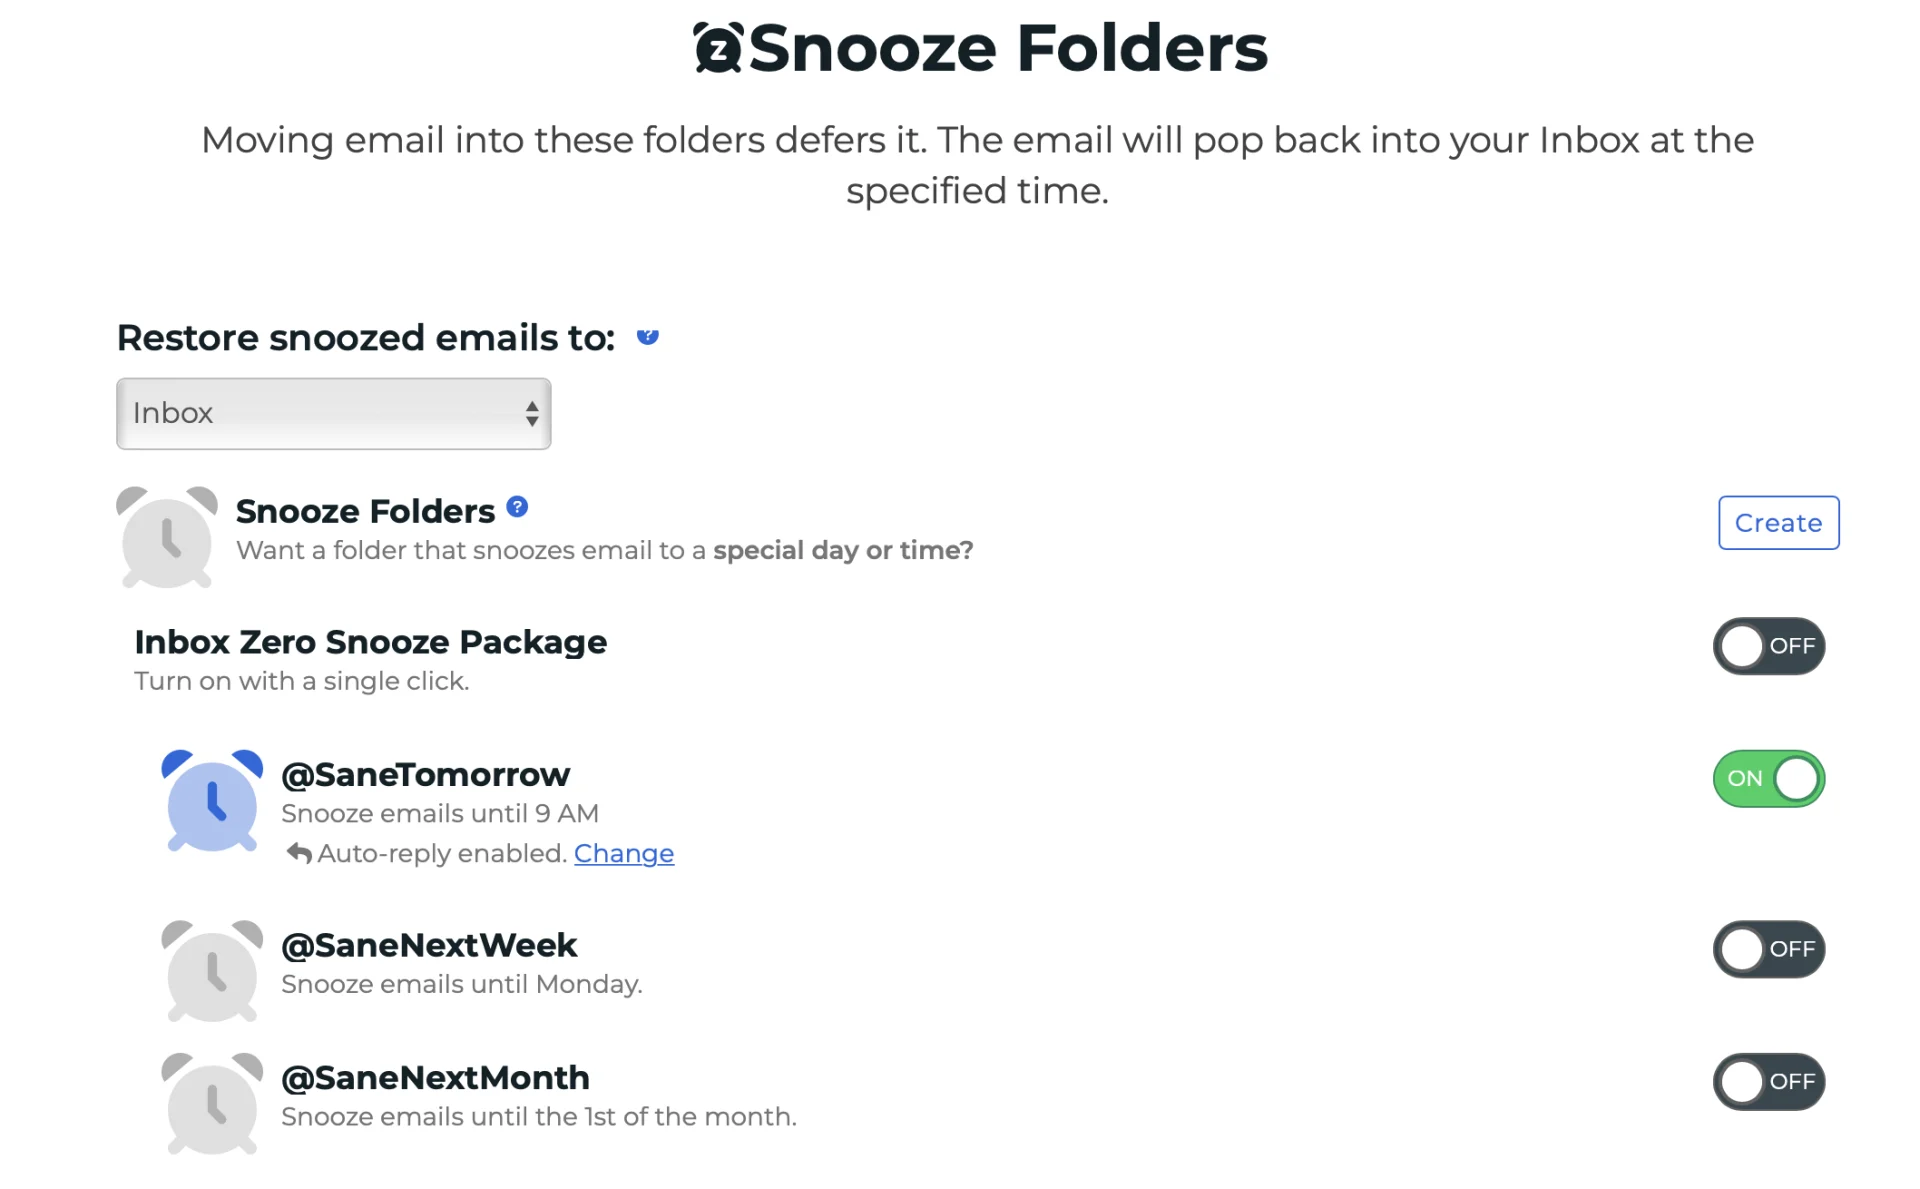 How to Snooze Emails, Using SaneBox